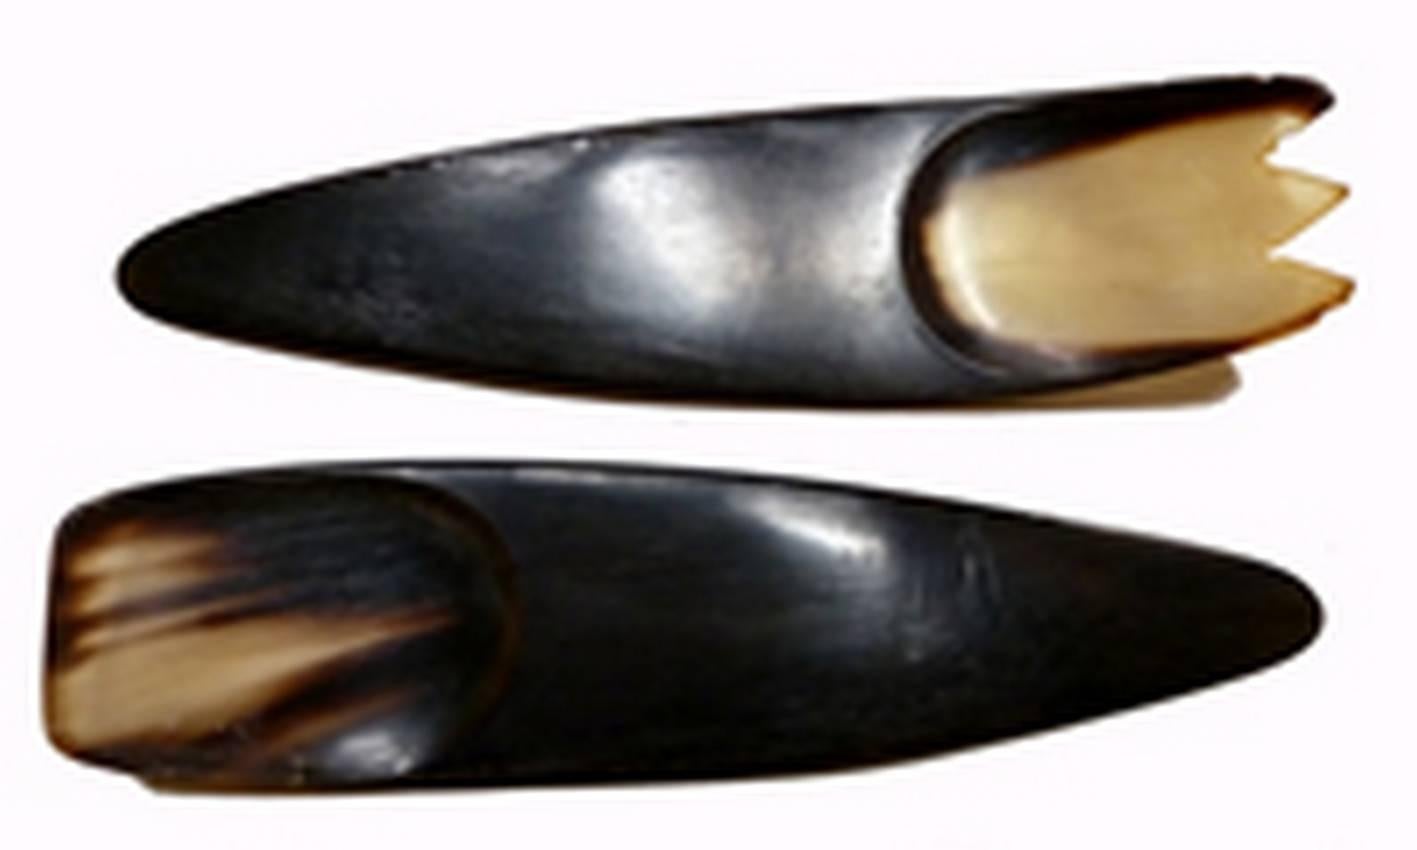 Pair of carved horn serving utensils by Austrian designer Carl Aubock dating from the 1960s. One piece has teeth like a fork and the other can be used like a spoon.

The Werkstätte Carl Auböck is a fourth-generation Viennese workshop known for its